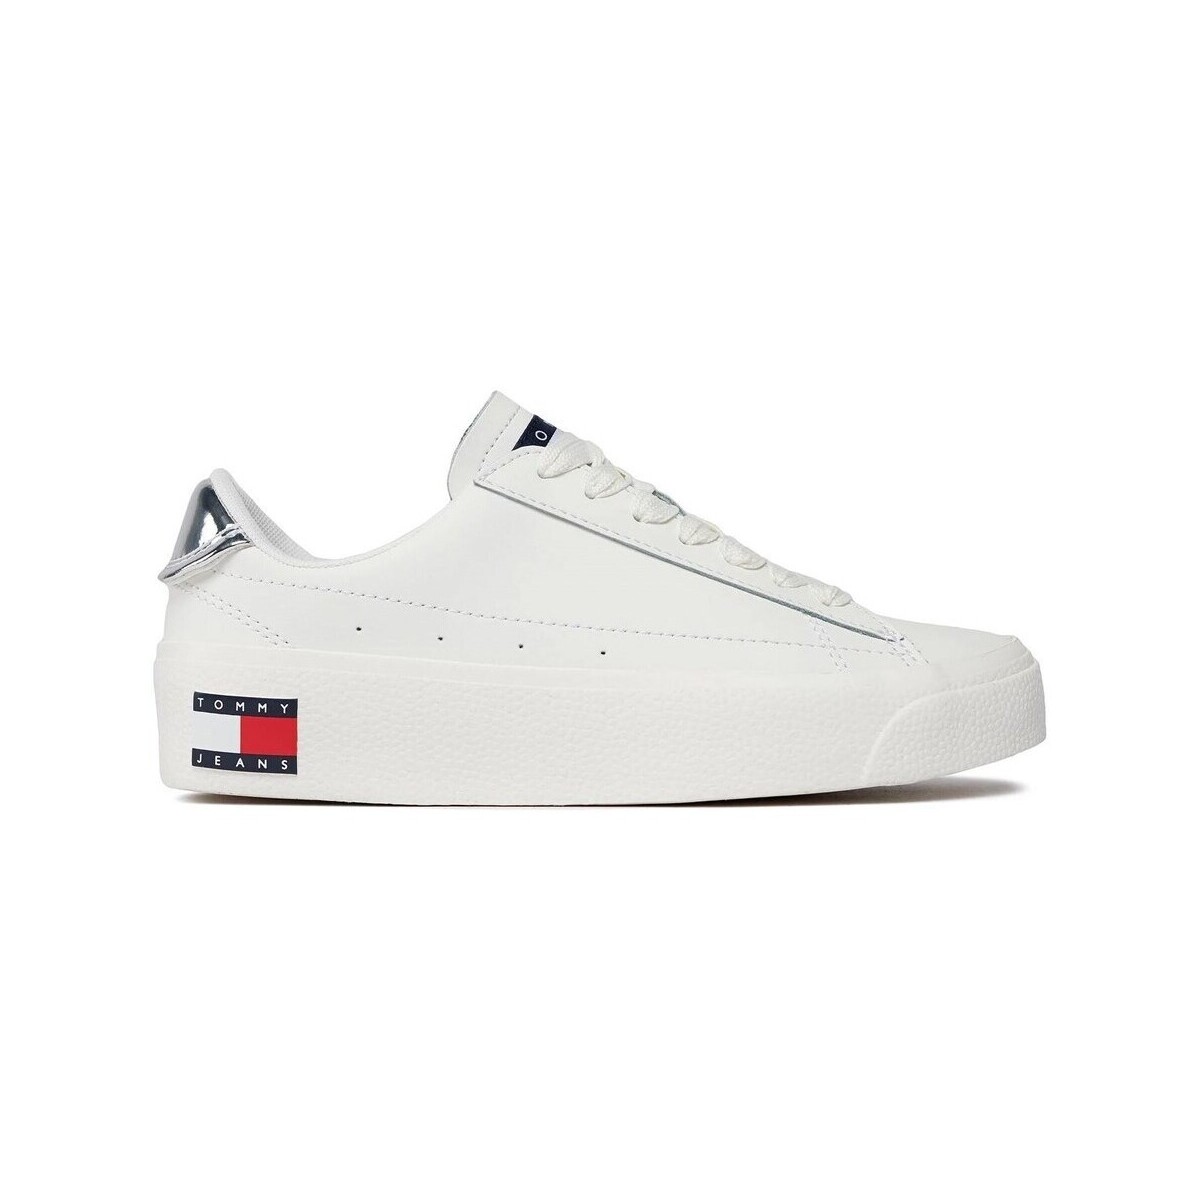 Tommy Hilfiger Vulc Leather Plat Lc White